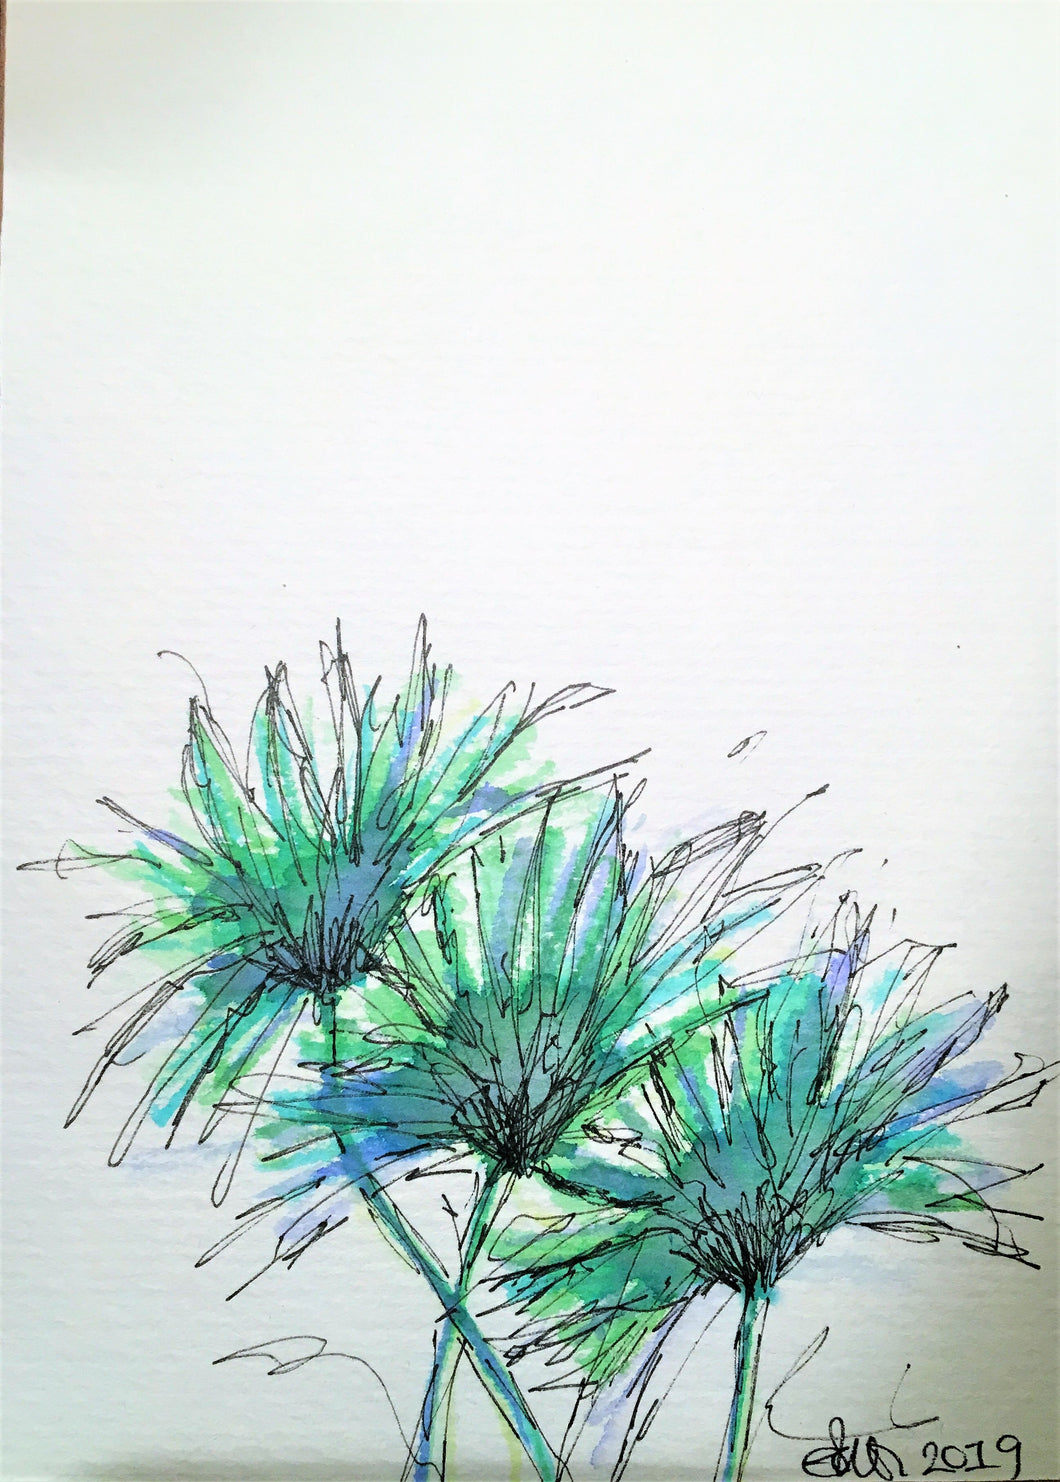 Handpainted Watercolour Greeting Card - Abstract Green/Blue/Turquoise with Flower Design - eDgE dEsiGn London